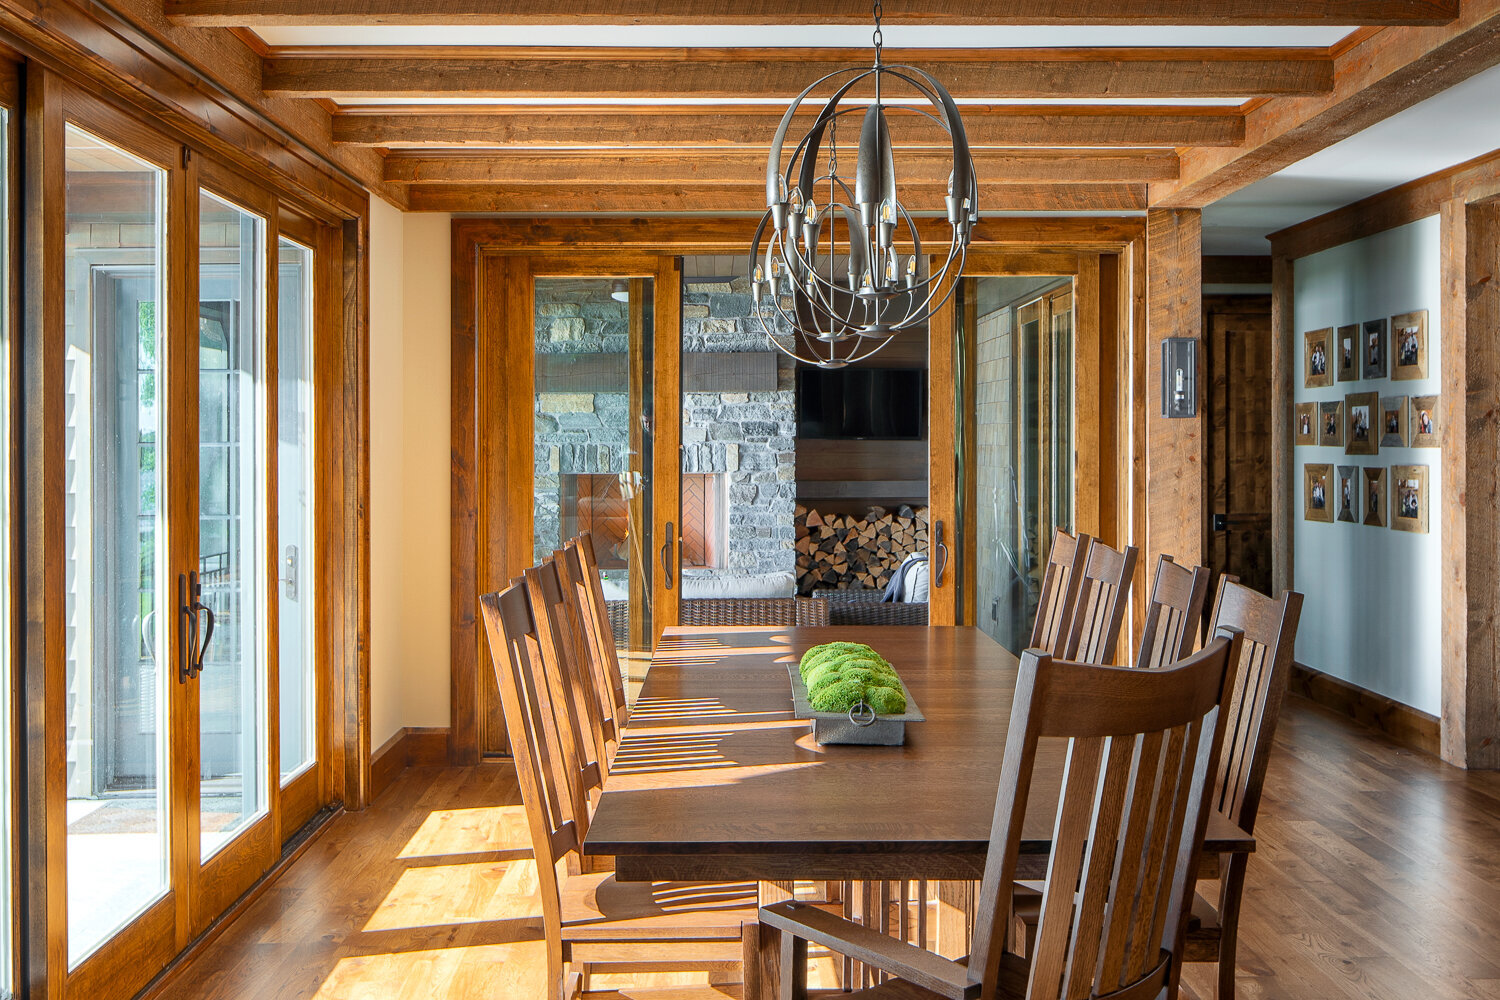 Beautiful rustic dining room with floor to ceiling windows